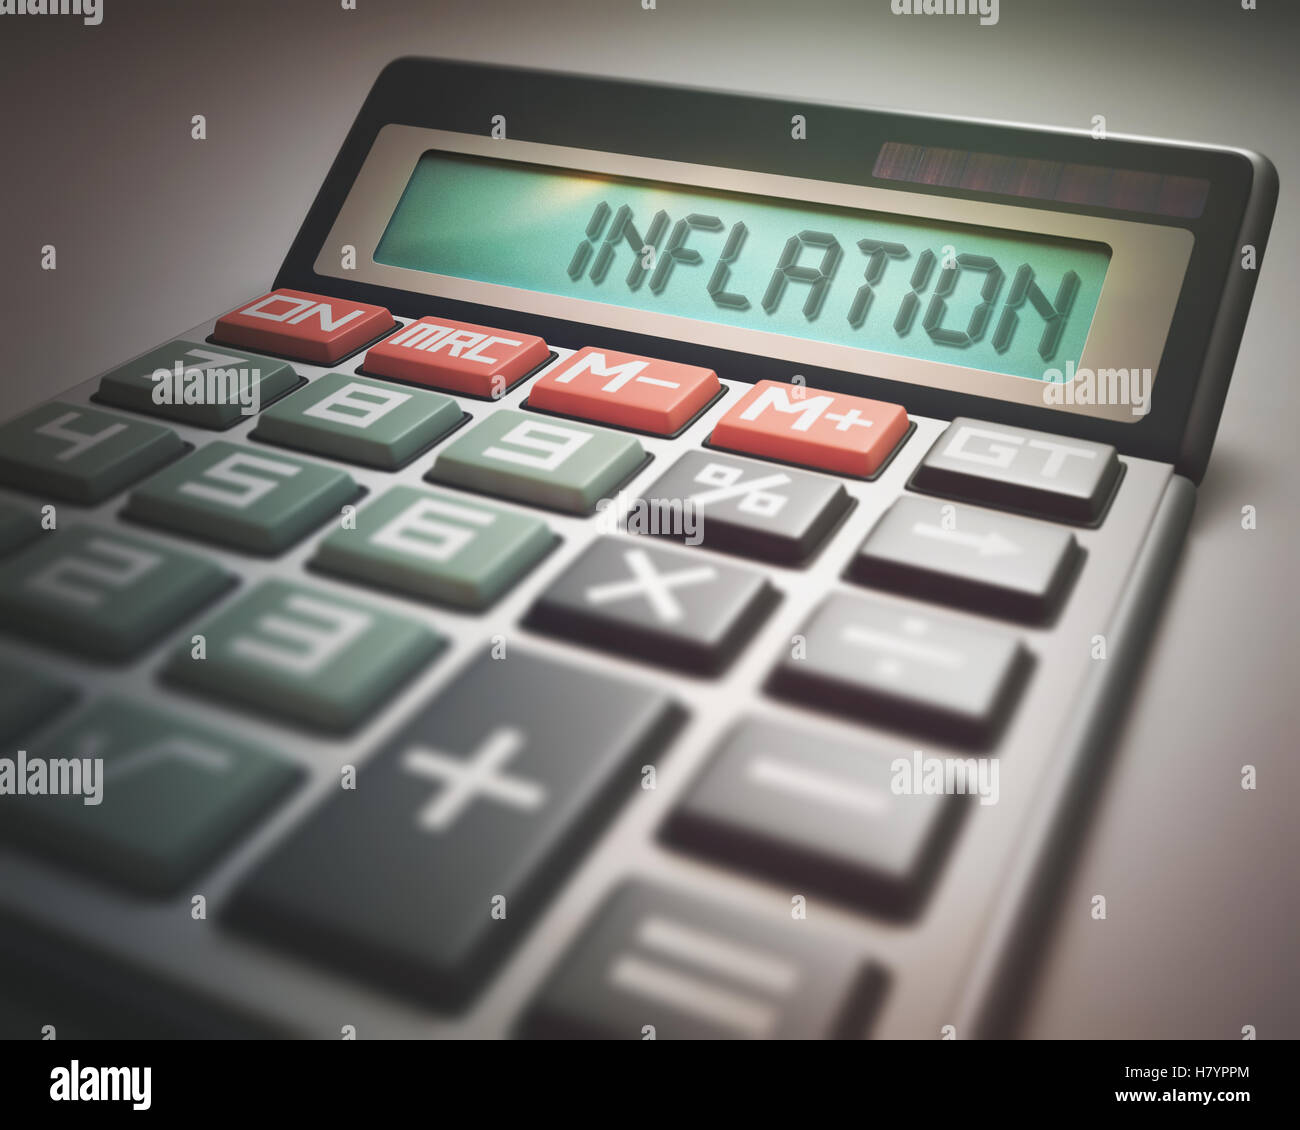 Solar calculator with the word INFLATION on the display. 3D illustration, concept image of Business and Finance. Stock Photo